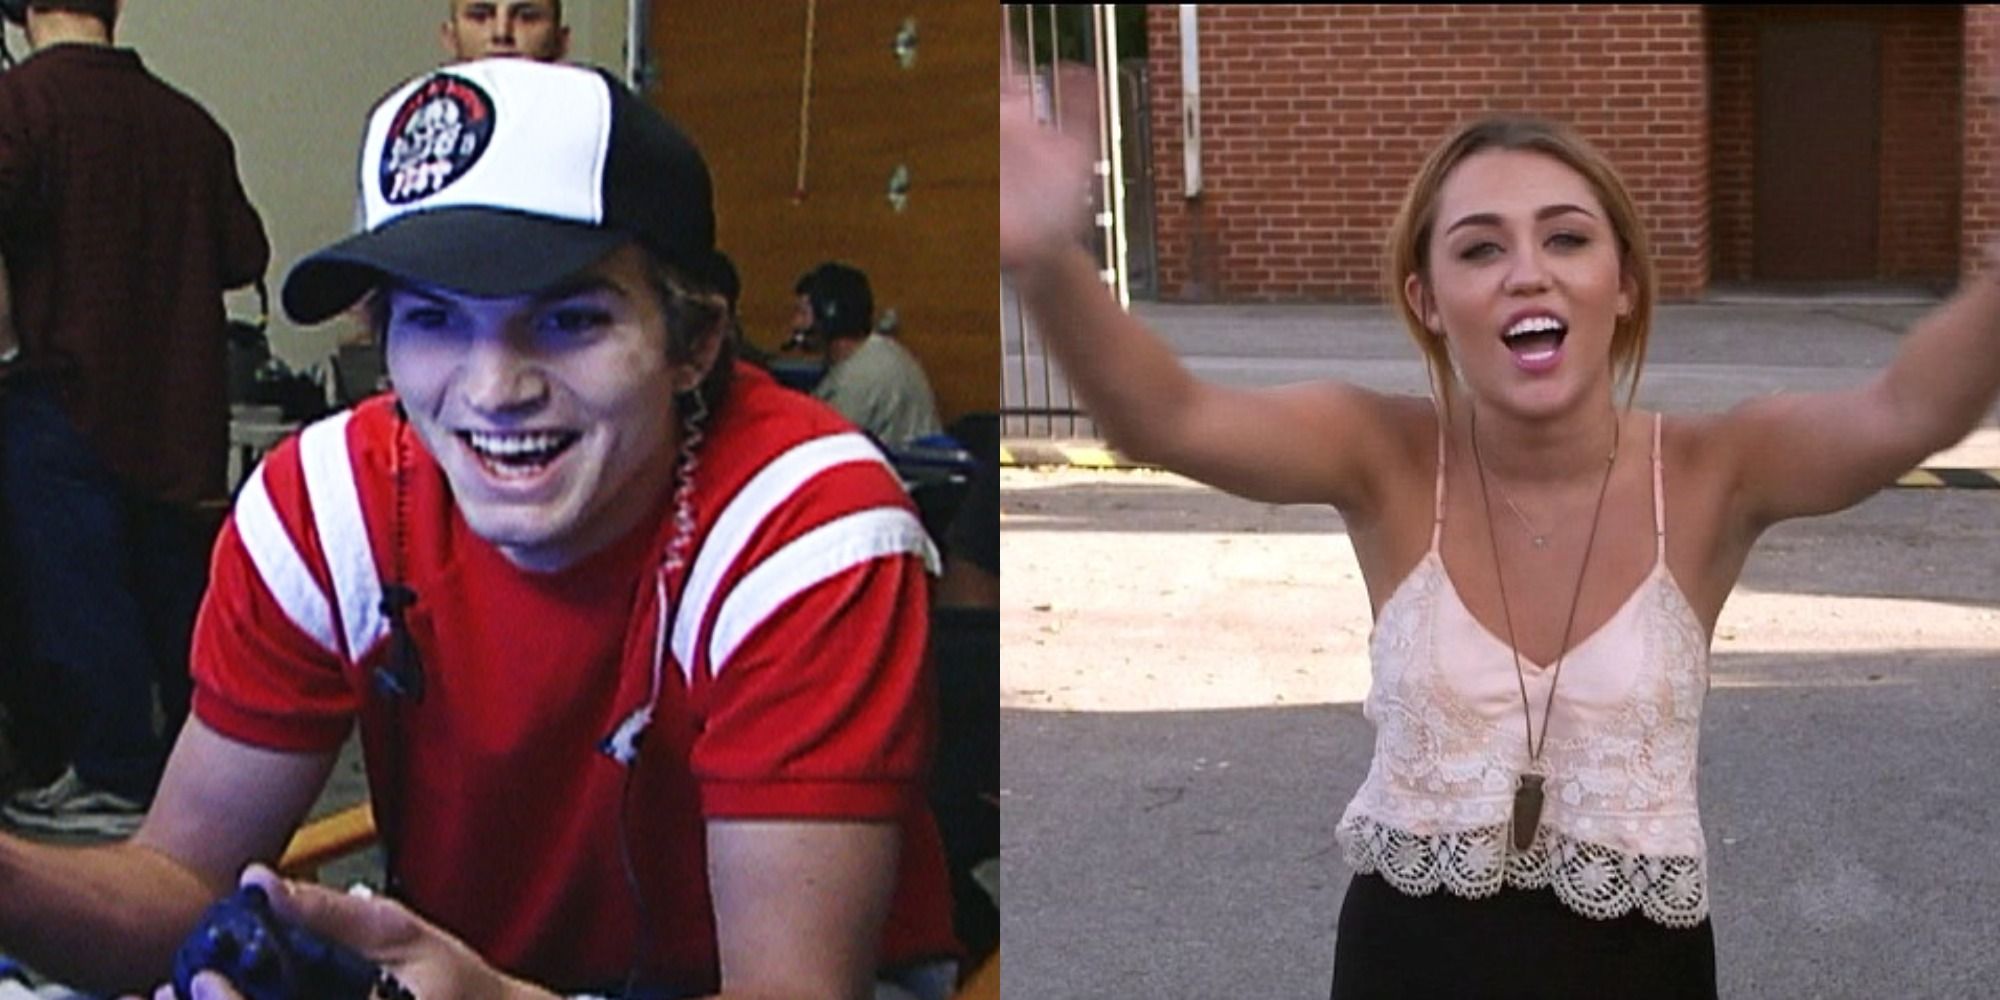 Two side by side images of Ashton Kutcher and Mylie Cyrus in Punk'd